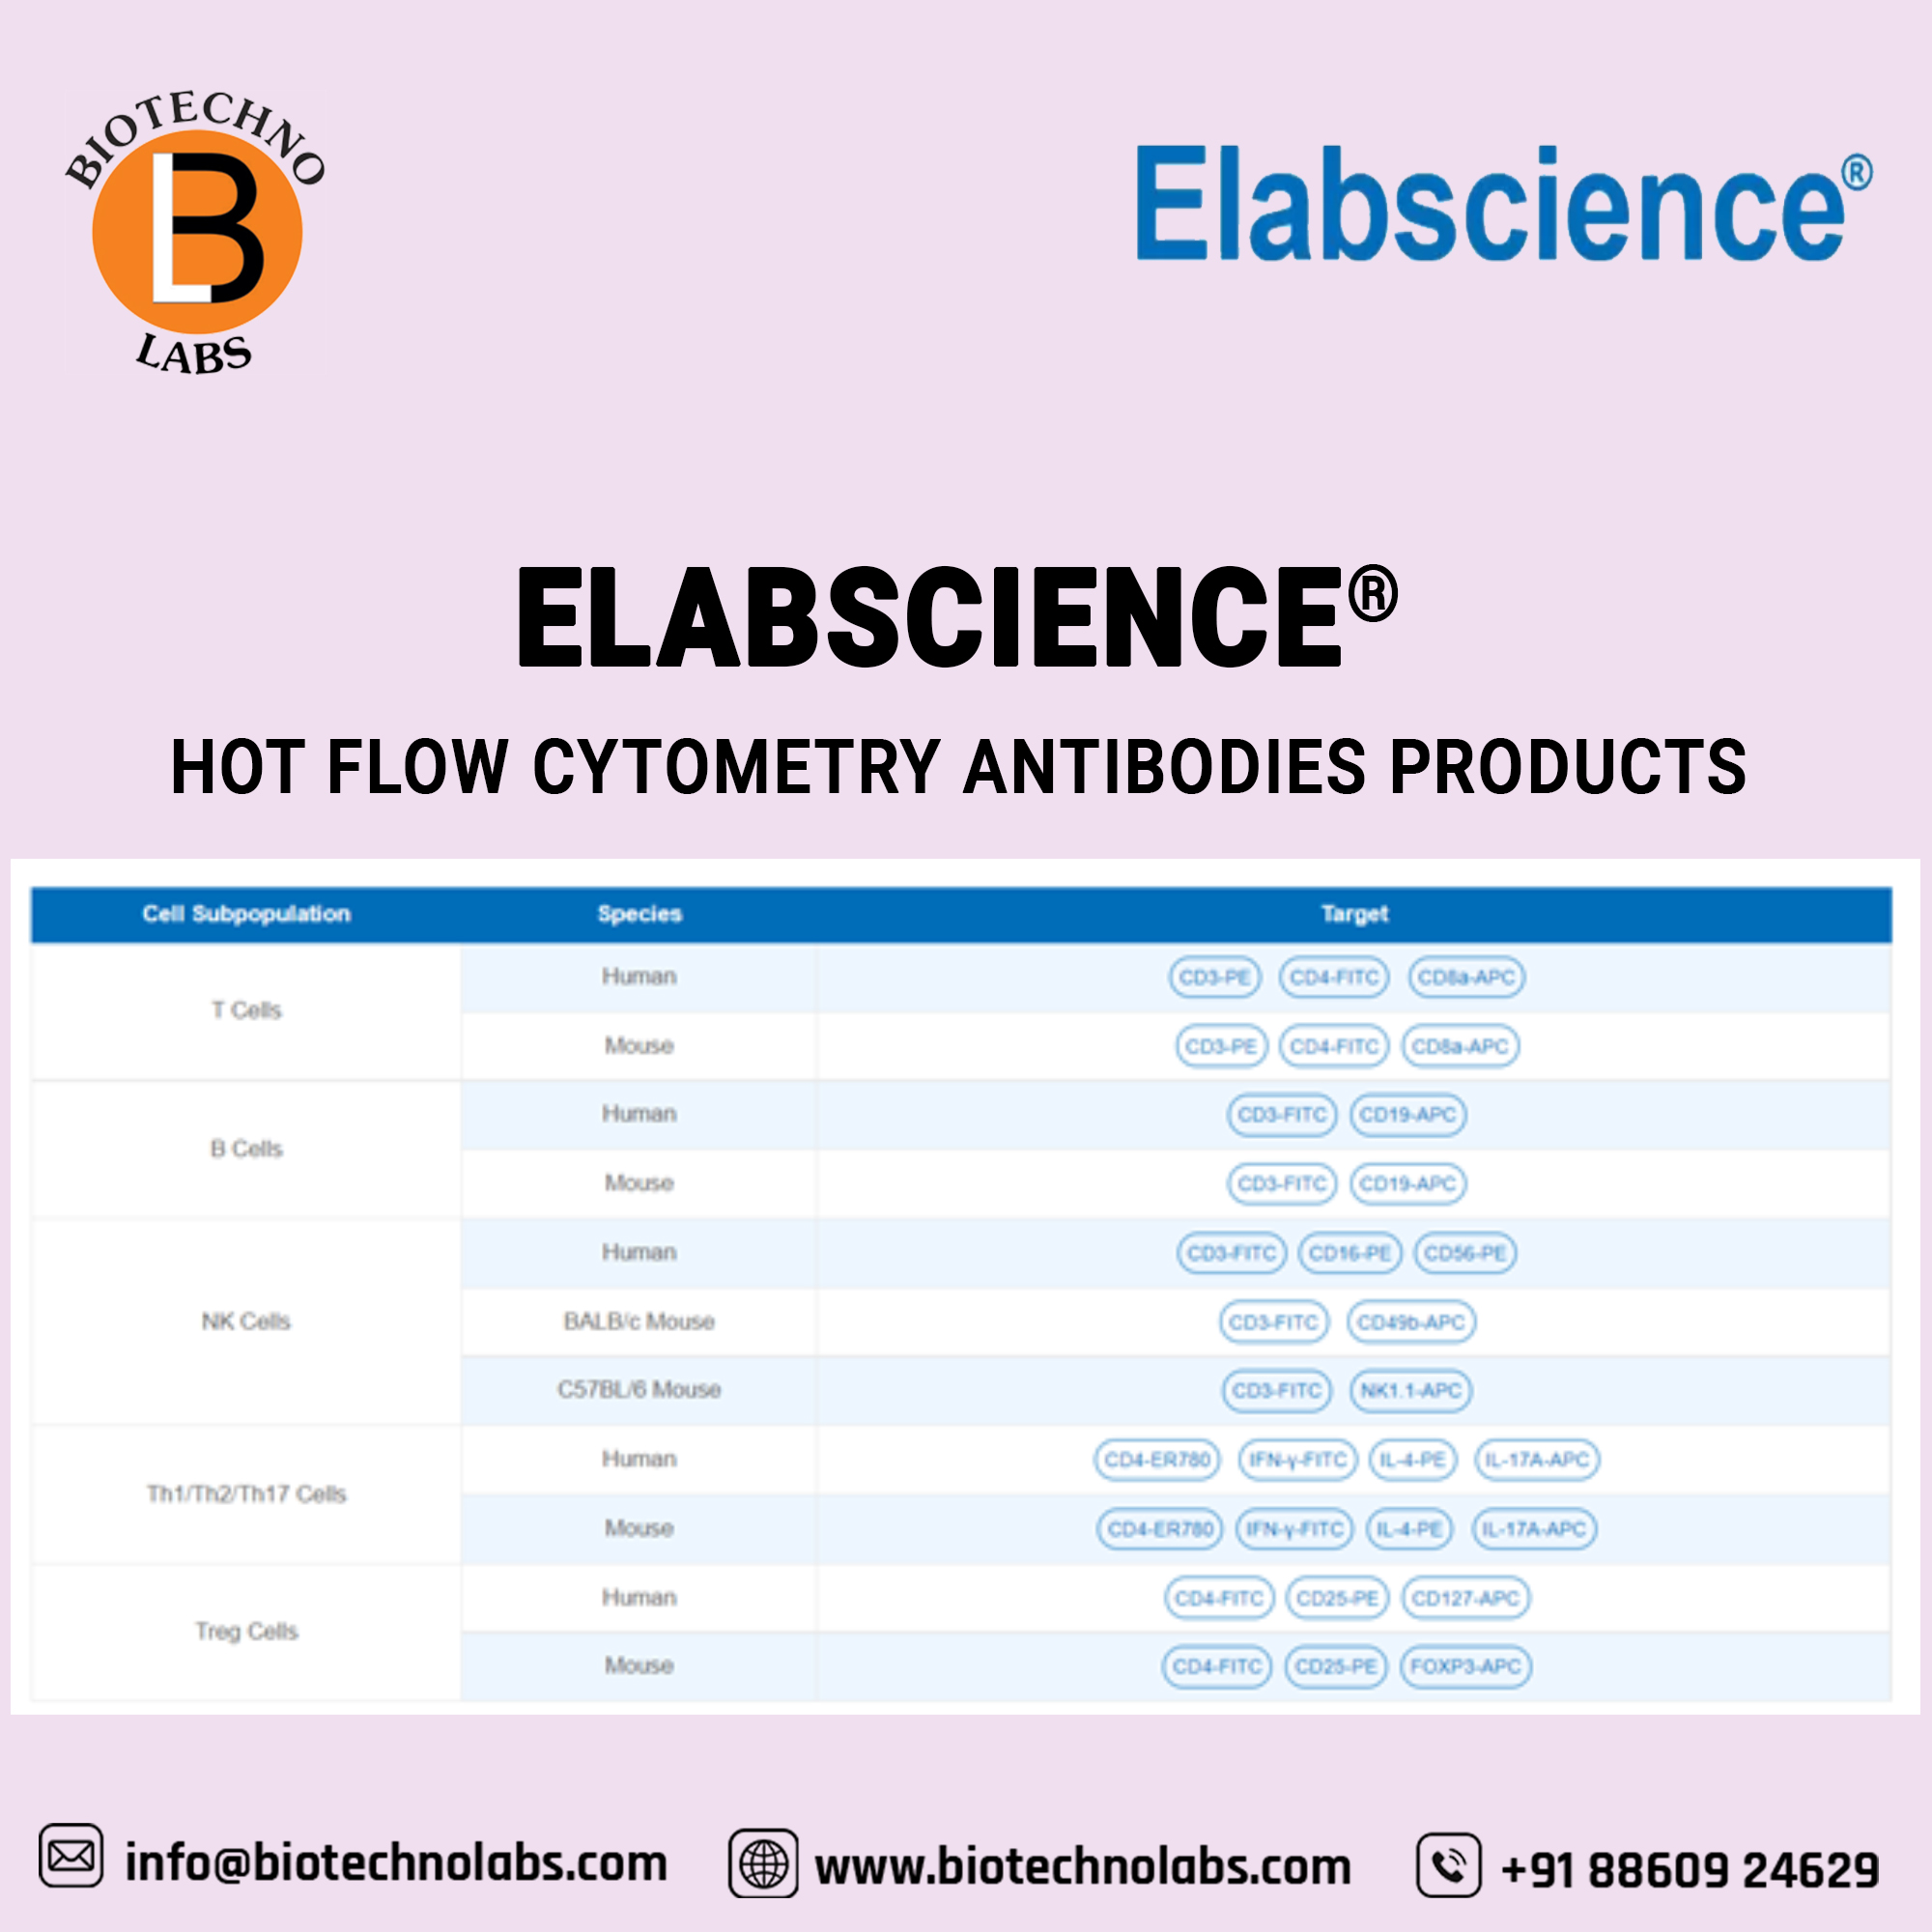 Elabscience® Hot Flow Cytometry Antibodies Products